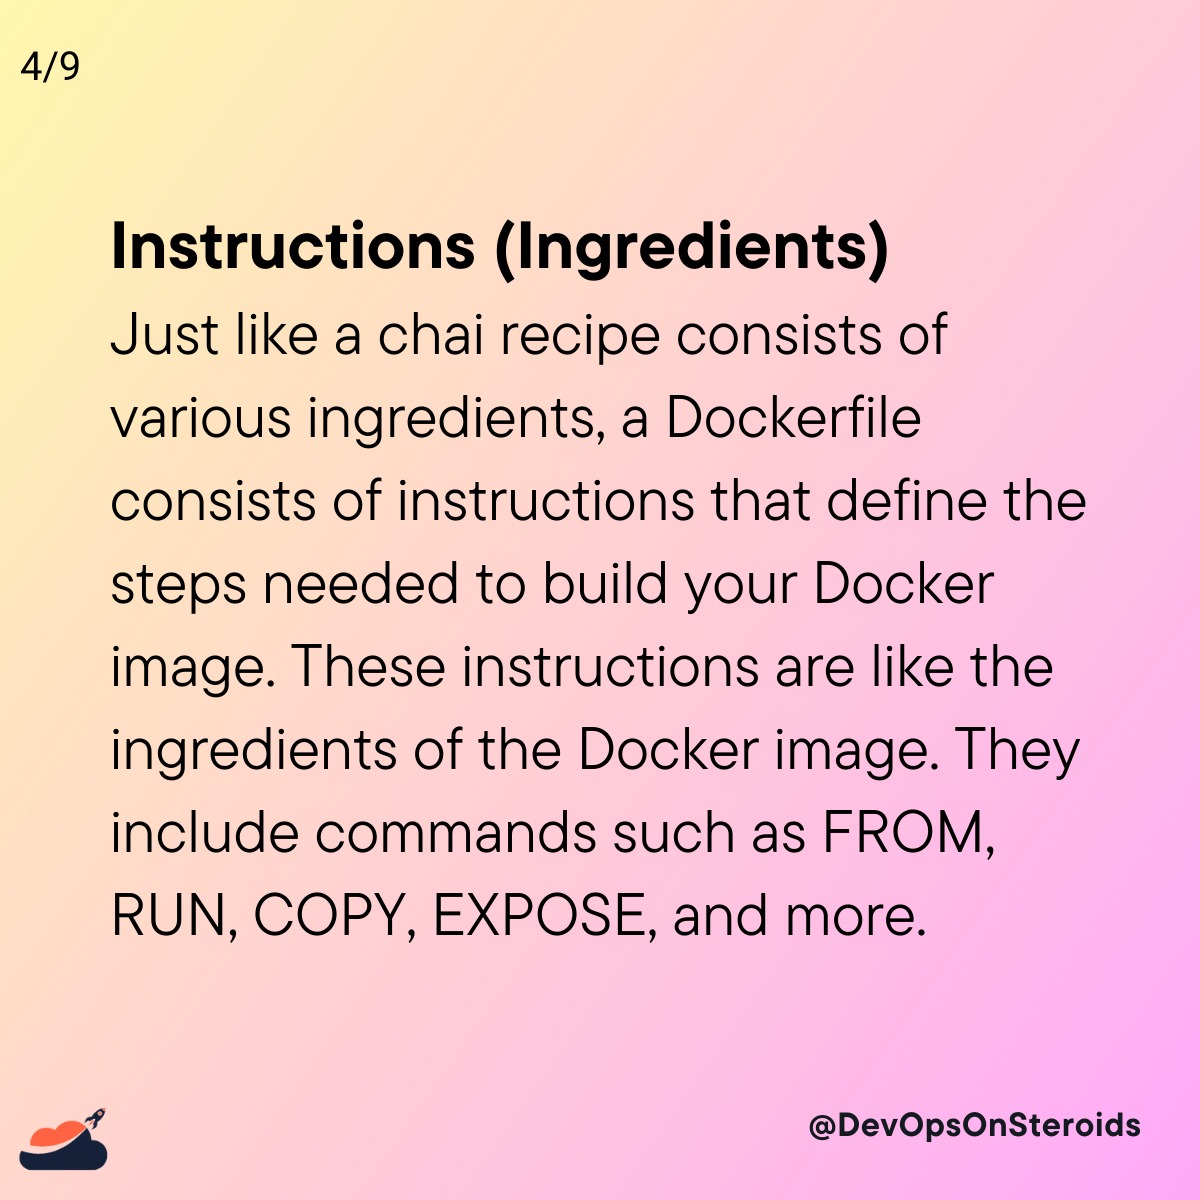 A Dockerfile is a text file that contains a set of instructions used to build a Docker image. It serves as a recipe or blueprint for creating a containerized environment with specific configurations and dependencies
#Docker #Dockerfile#Containerization
#DevOps#Microservices